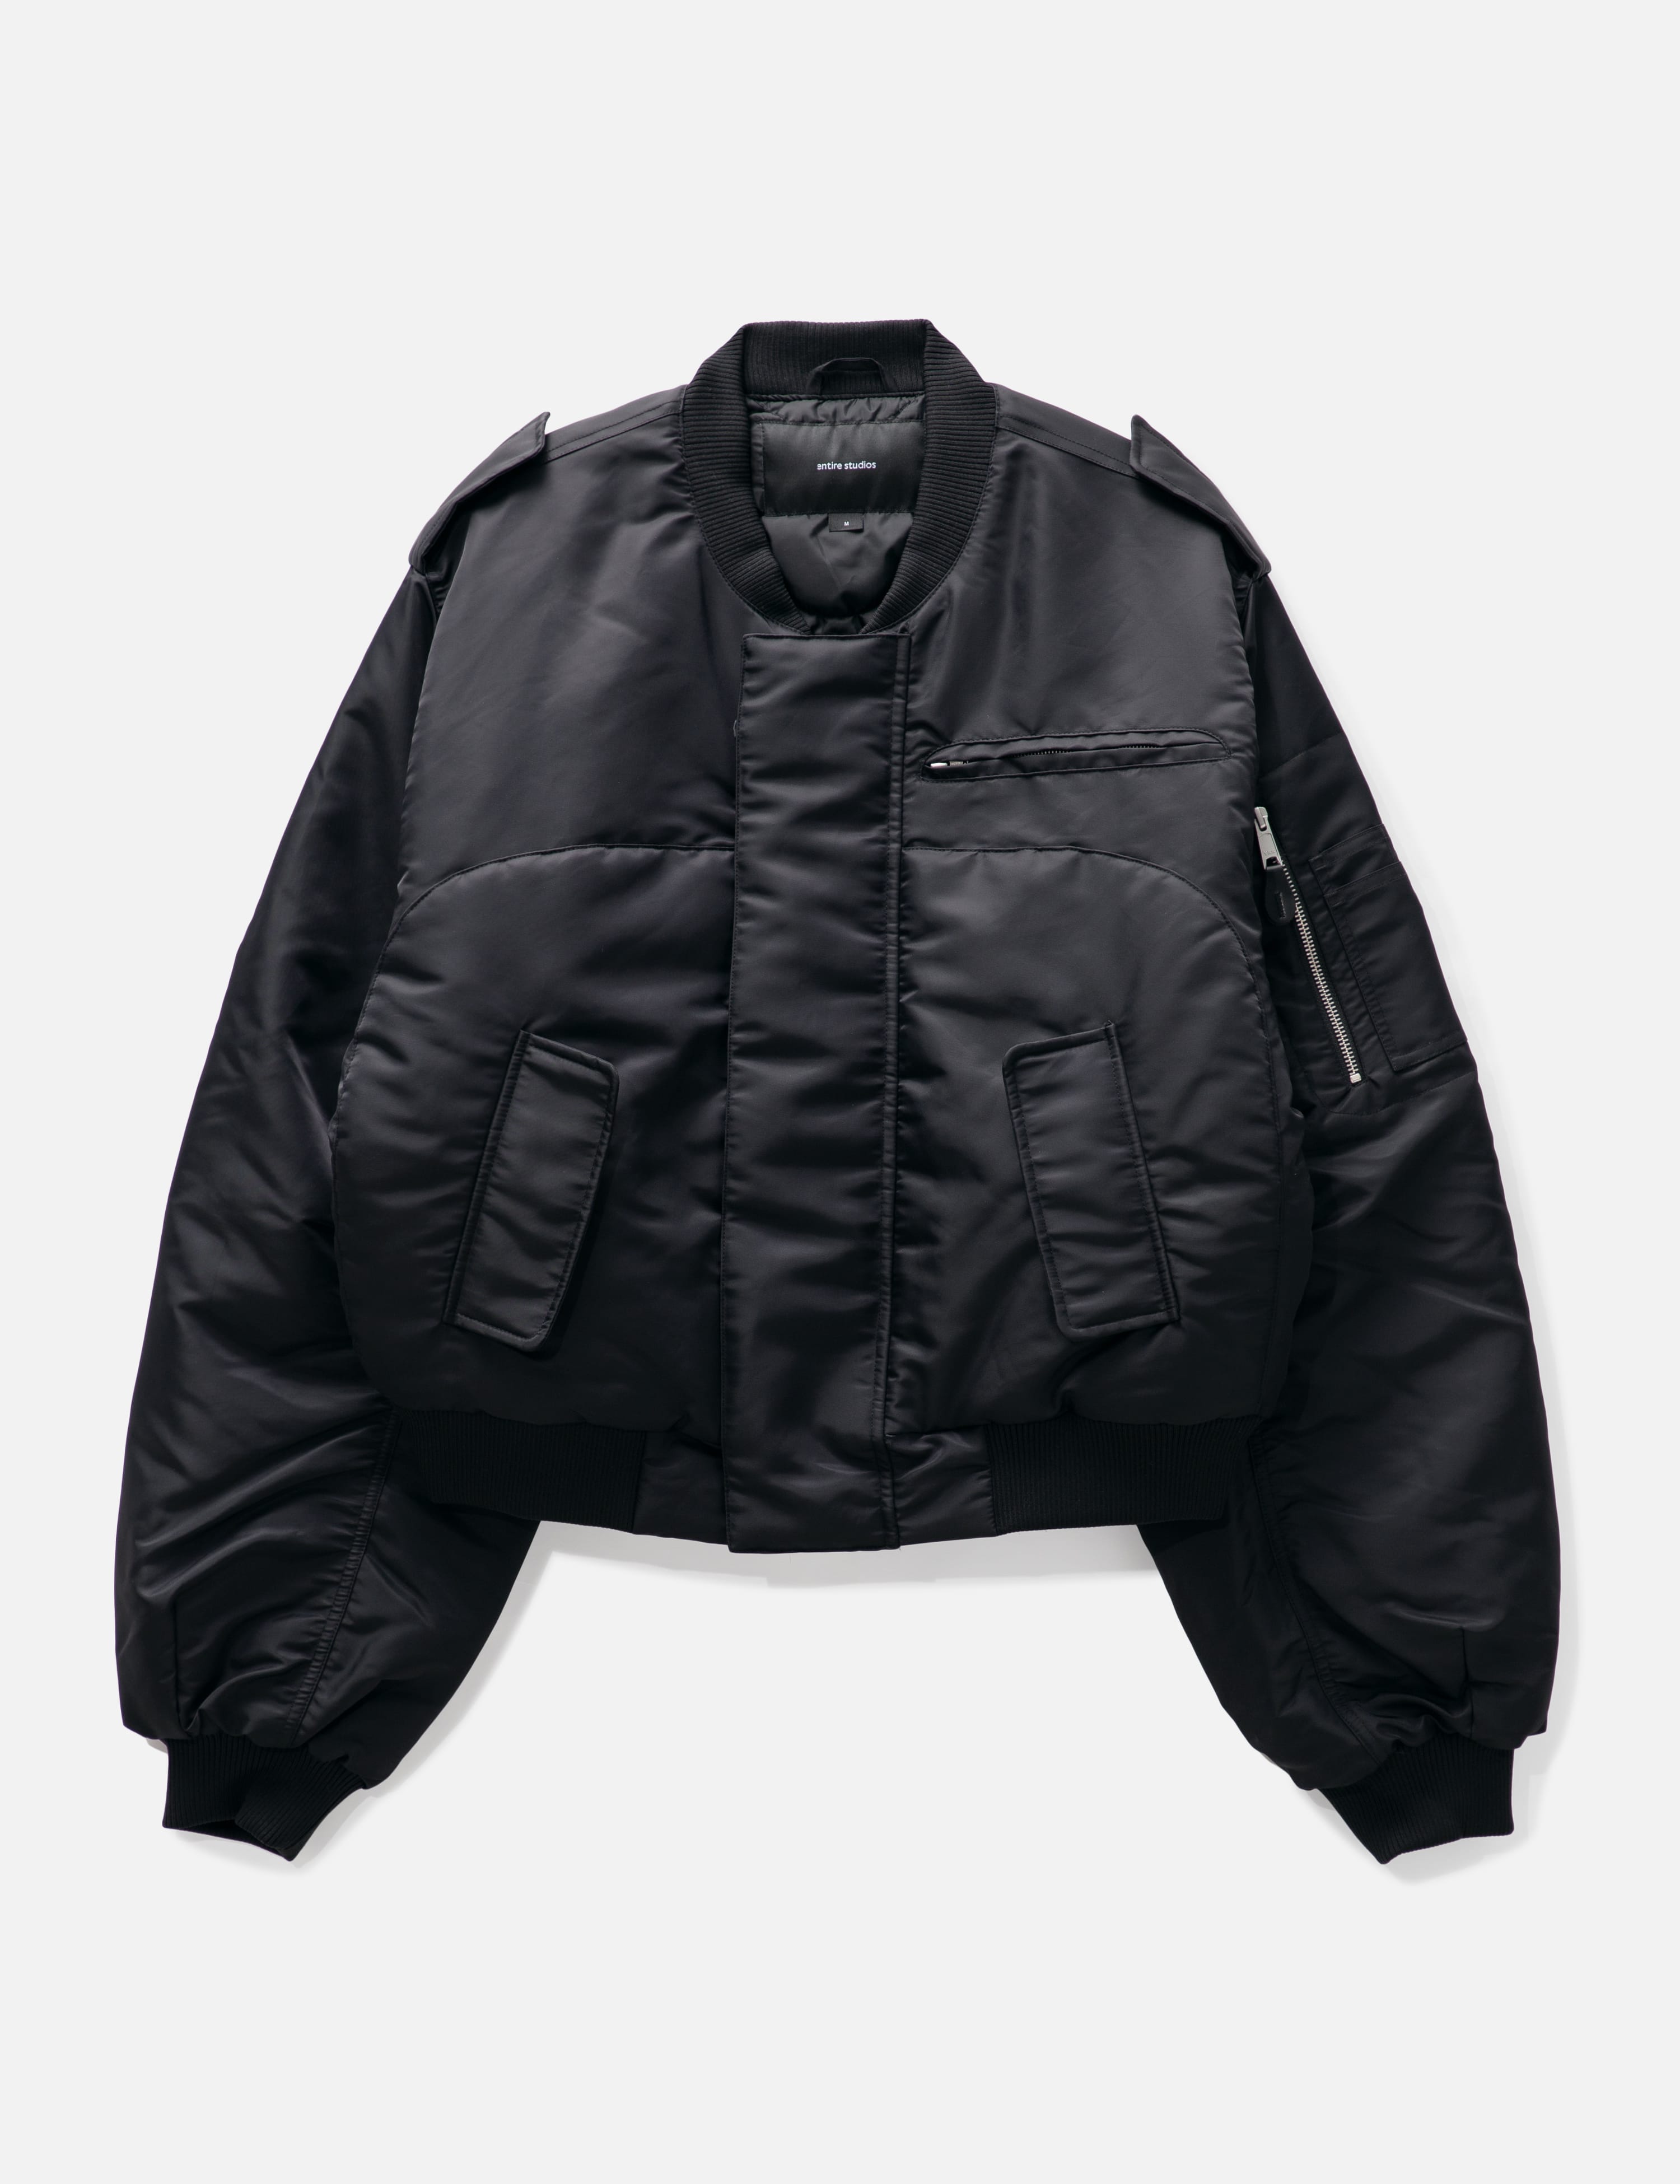 Entire Studios - A-2 Bomber Jacket | HBX - Globally Curated 